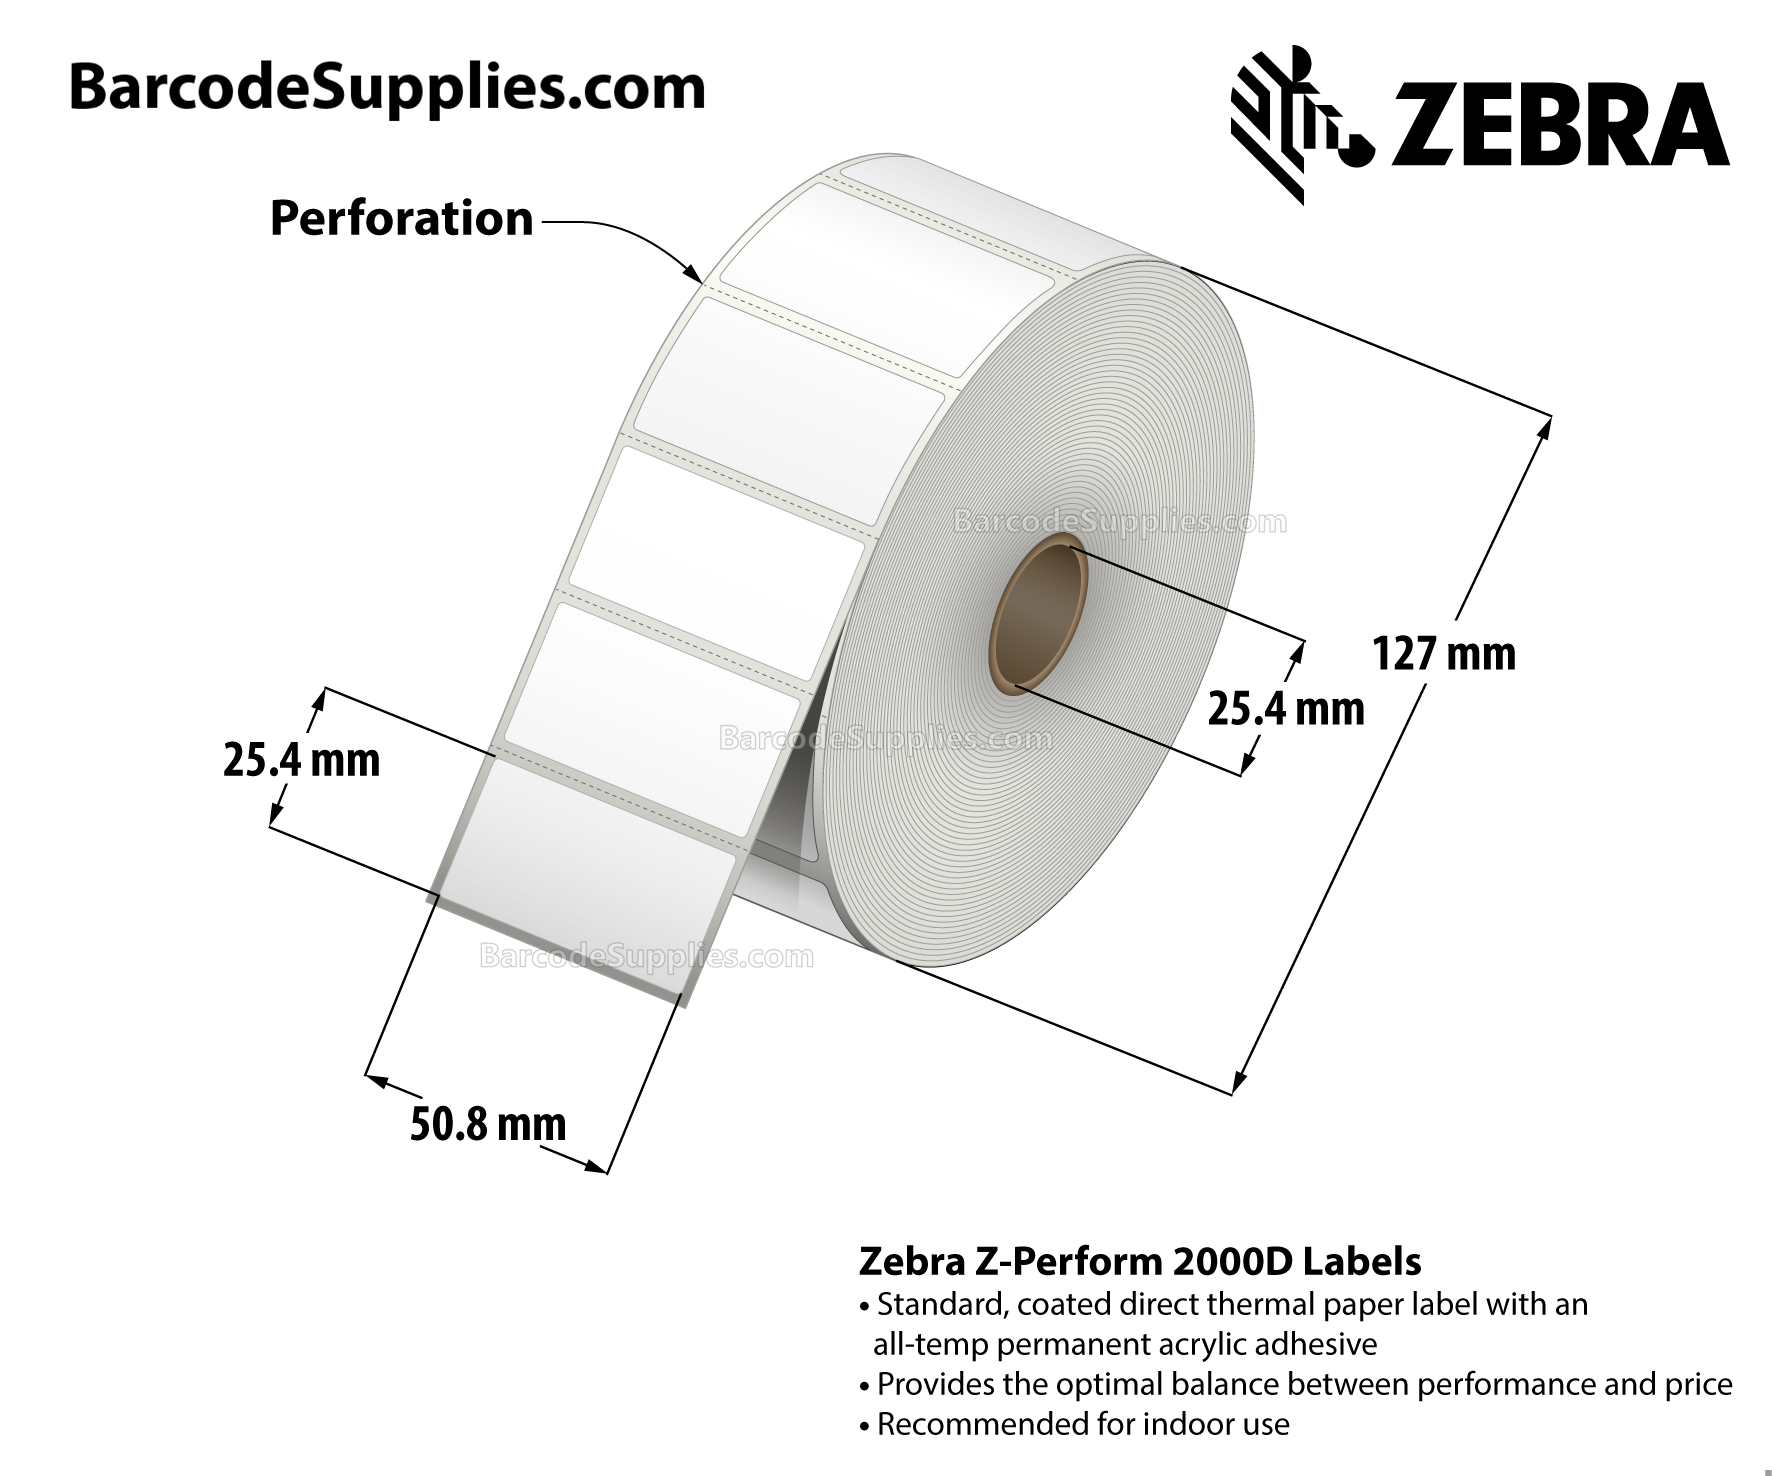 2 x 1 Direct Thermal White Z-Perform 2000D Labels With All-Temp Adhesive - Perforated - 2340 Labels Per Roll - Carton Of 6 Rolls - 14040 Labels Total - MPN: 10010028